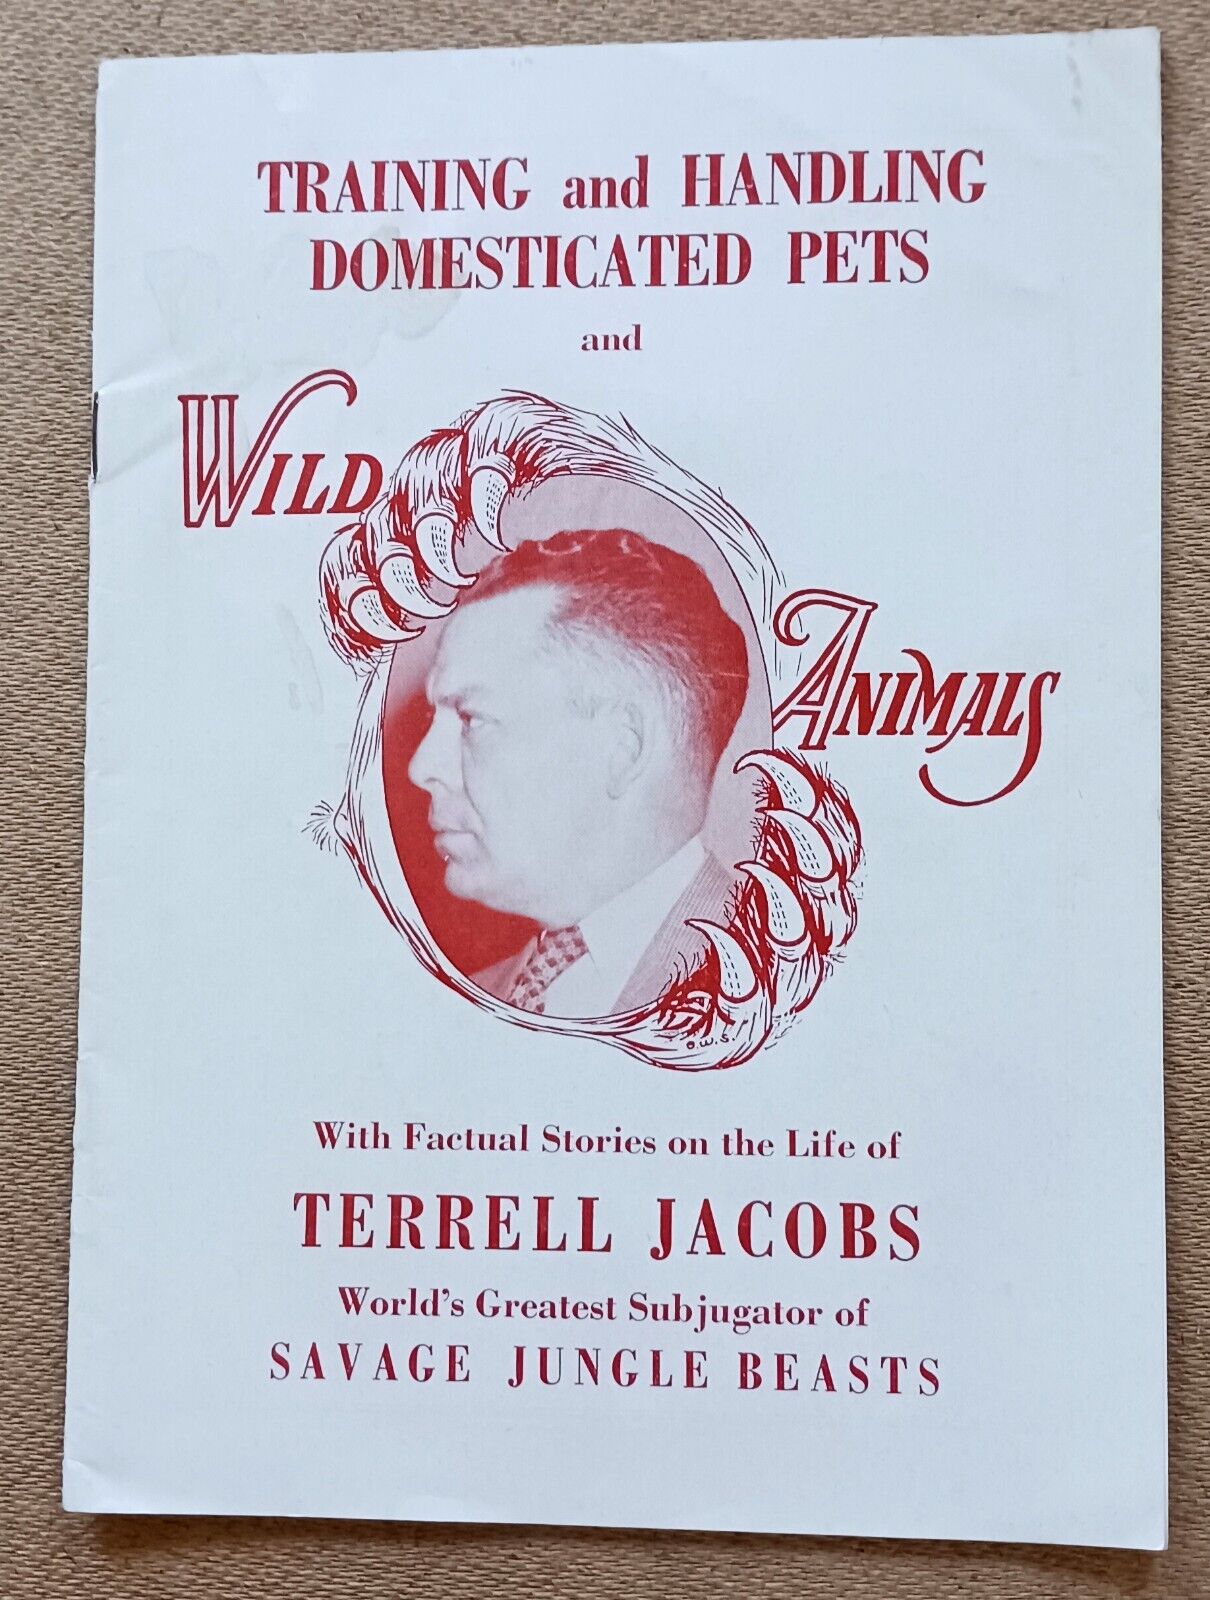 VTG Circus Booklet TERRELL JACOBS TRAINING HANDLING WILD ANIMALS Savage Beasts 